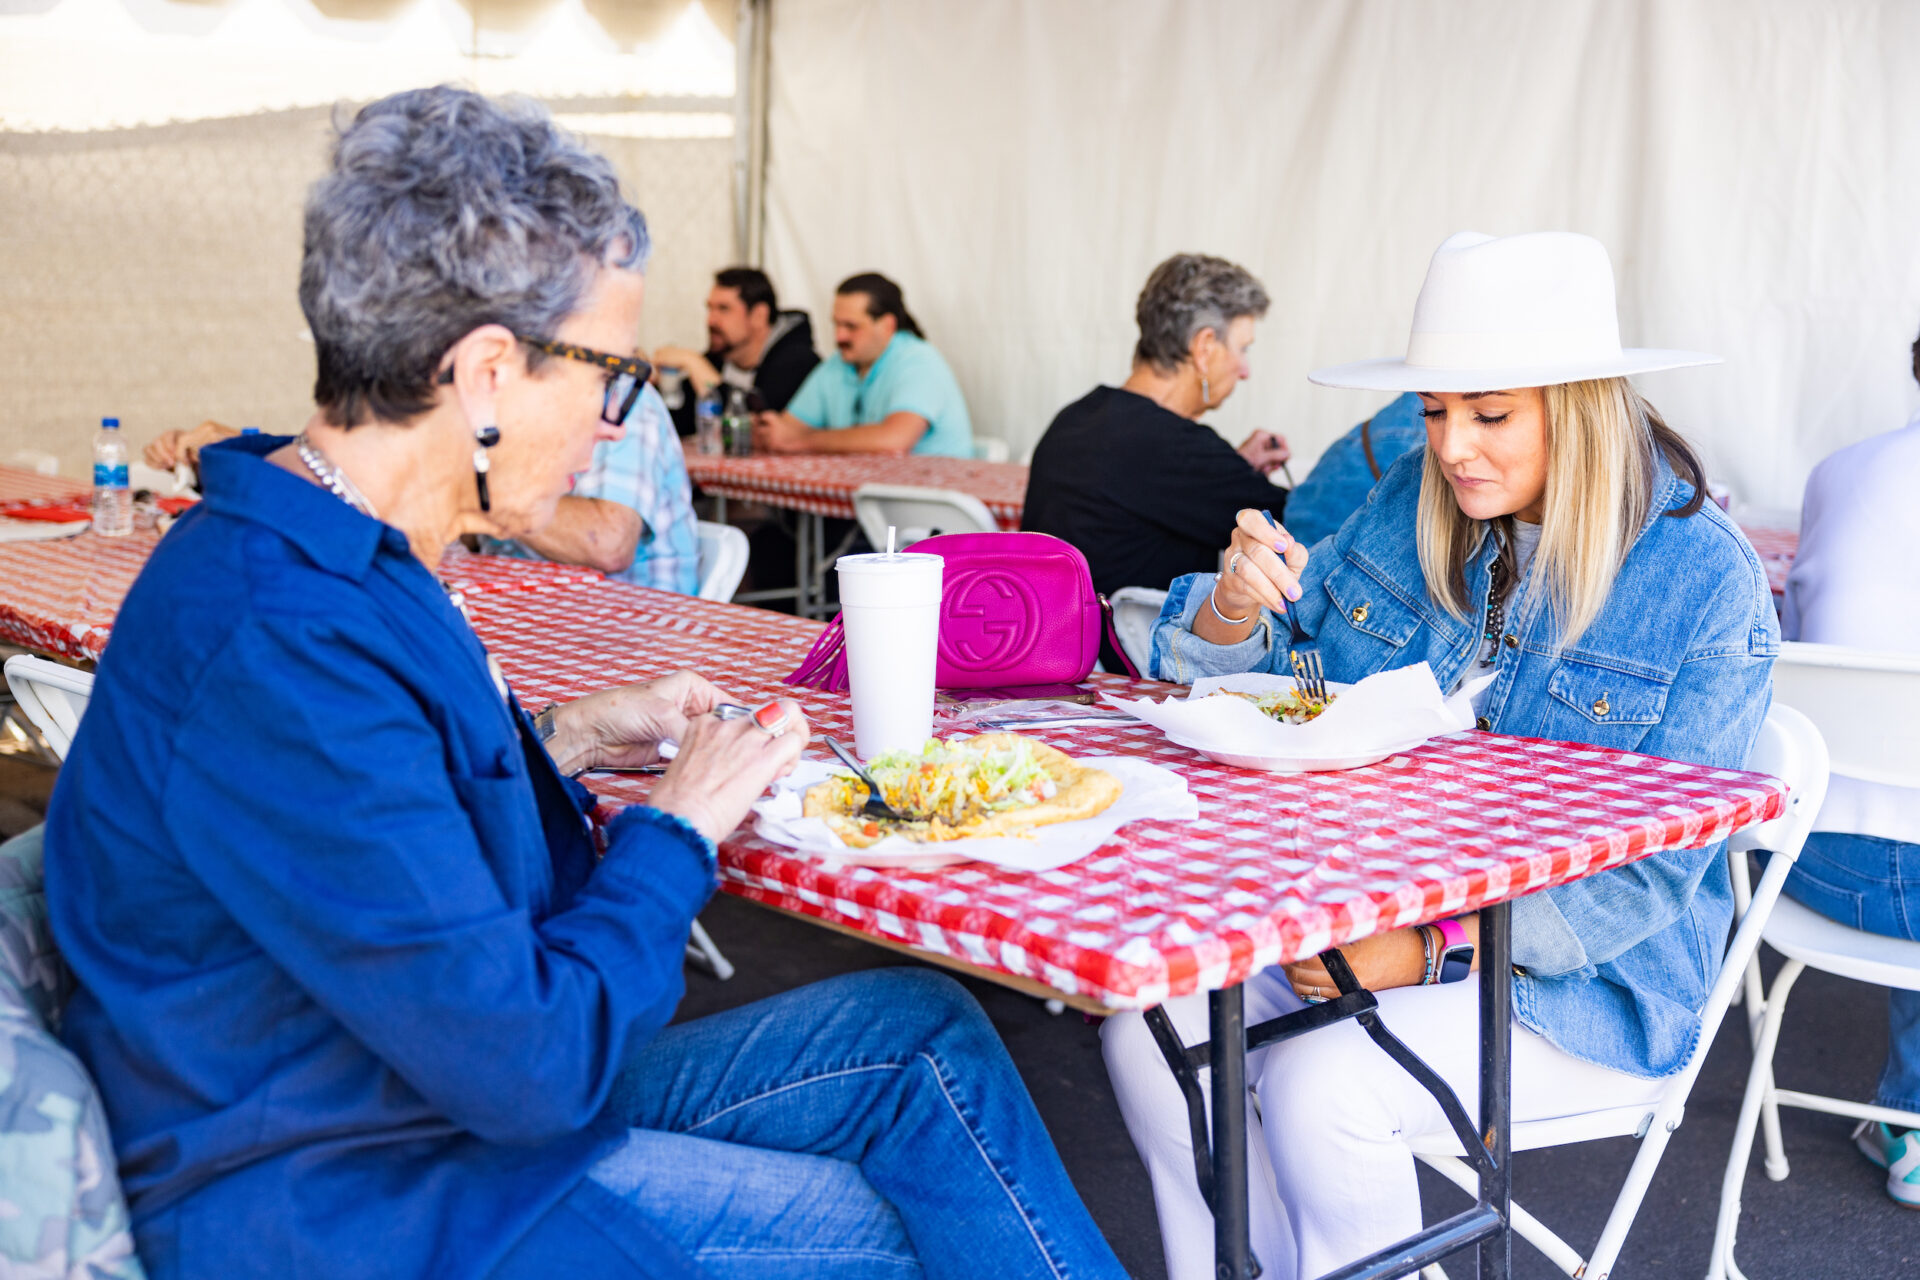 Two women eating at a table in a tent.